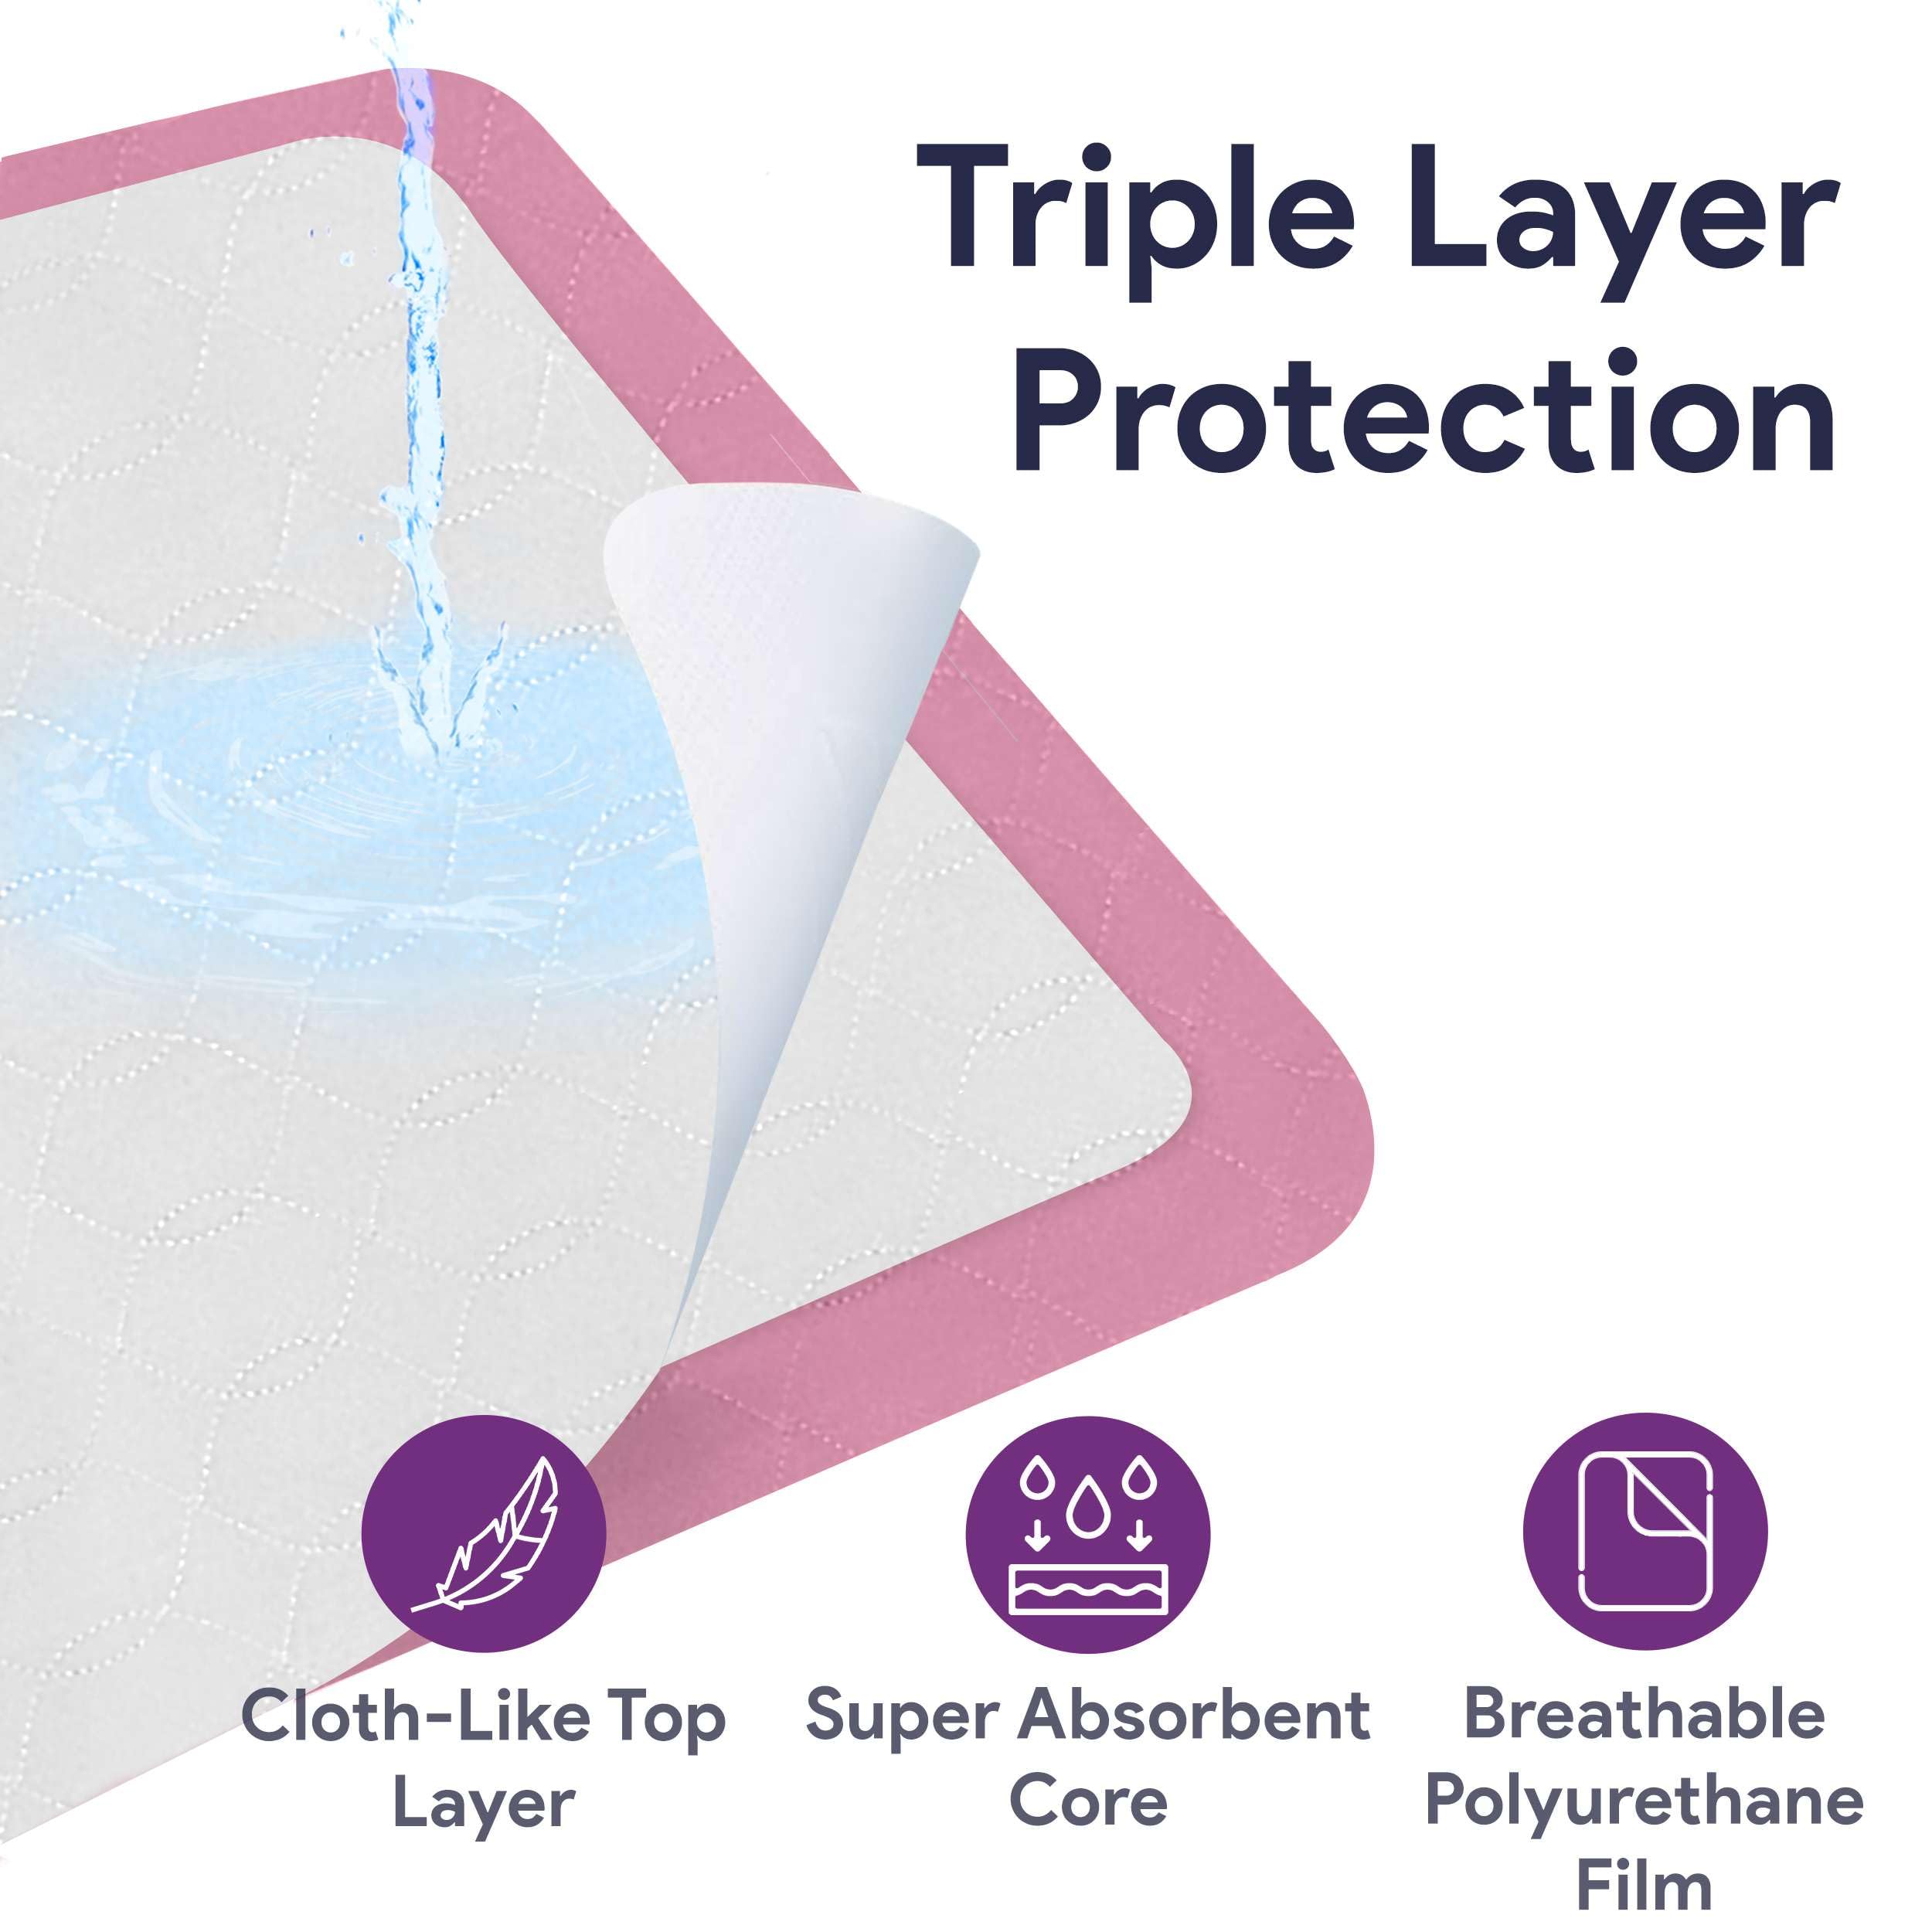 Incontinence Bed Pads Washable - Reusable Waterproof Bed Pads - Soft and Leak Proof Chucks - Moderate Absorbent Pee Pads for Adults - Withstands Extensive Washing  - Like New